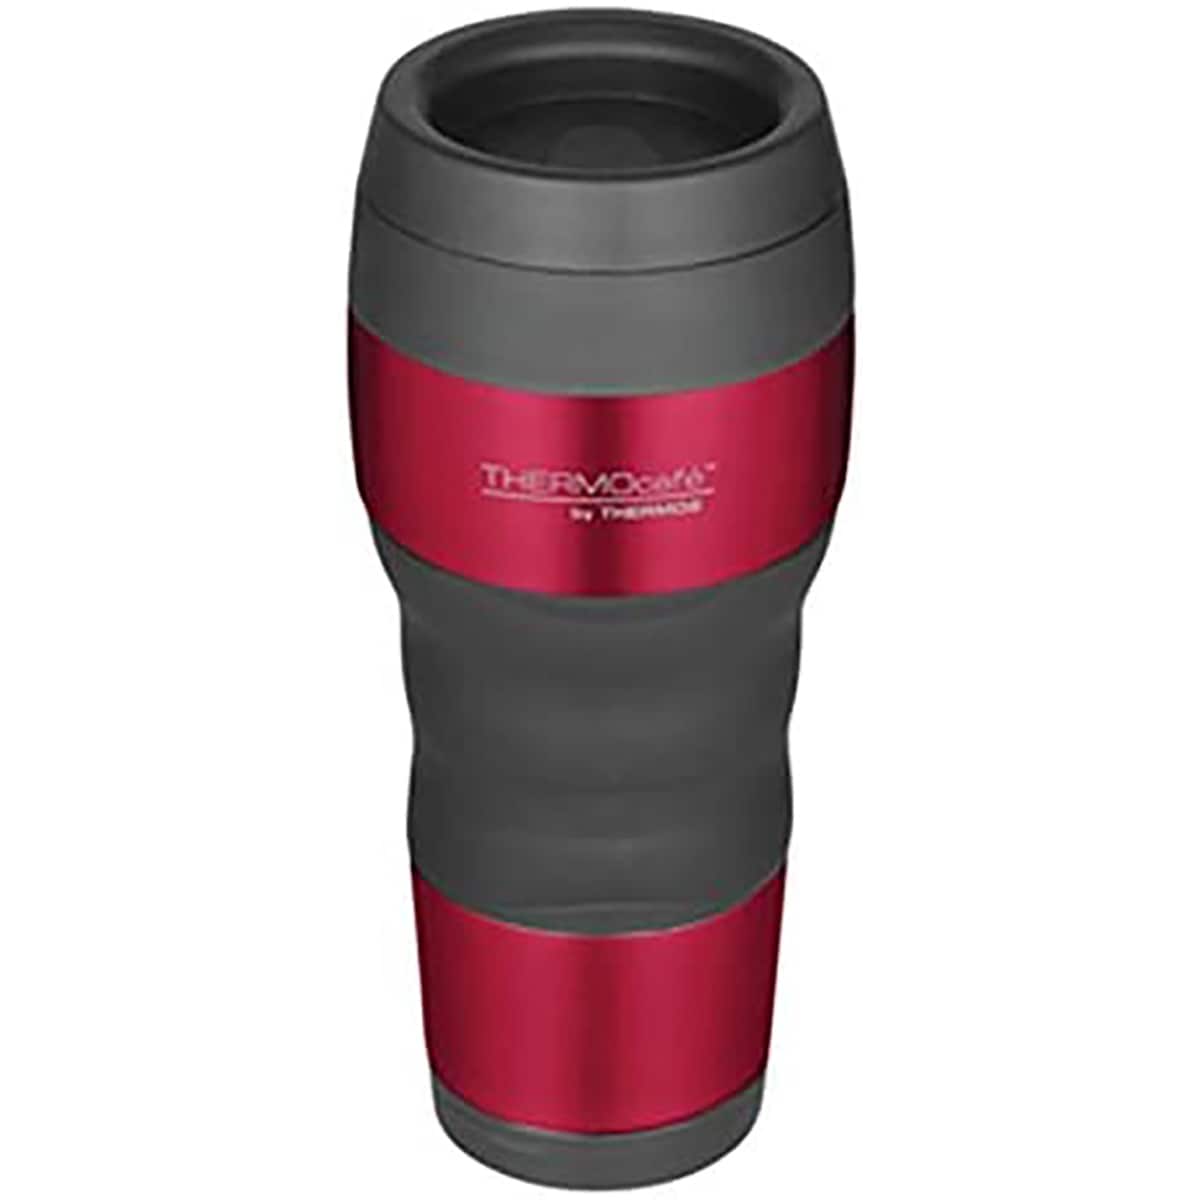 Thermos 16 oz. ThermoCafe Stainless Steel Travel Tumbler w/ Grip - Red